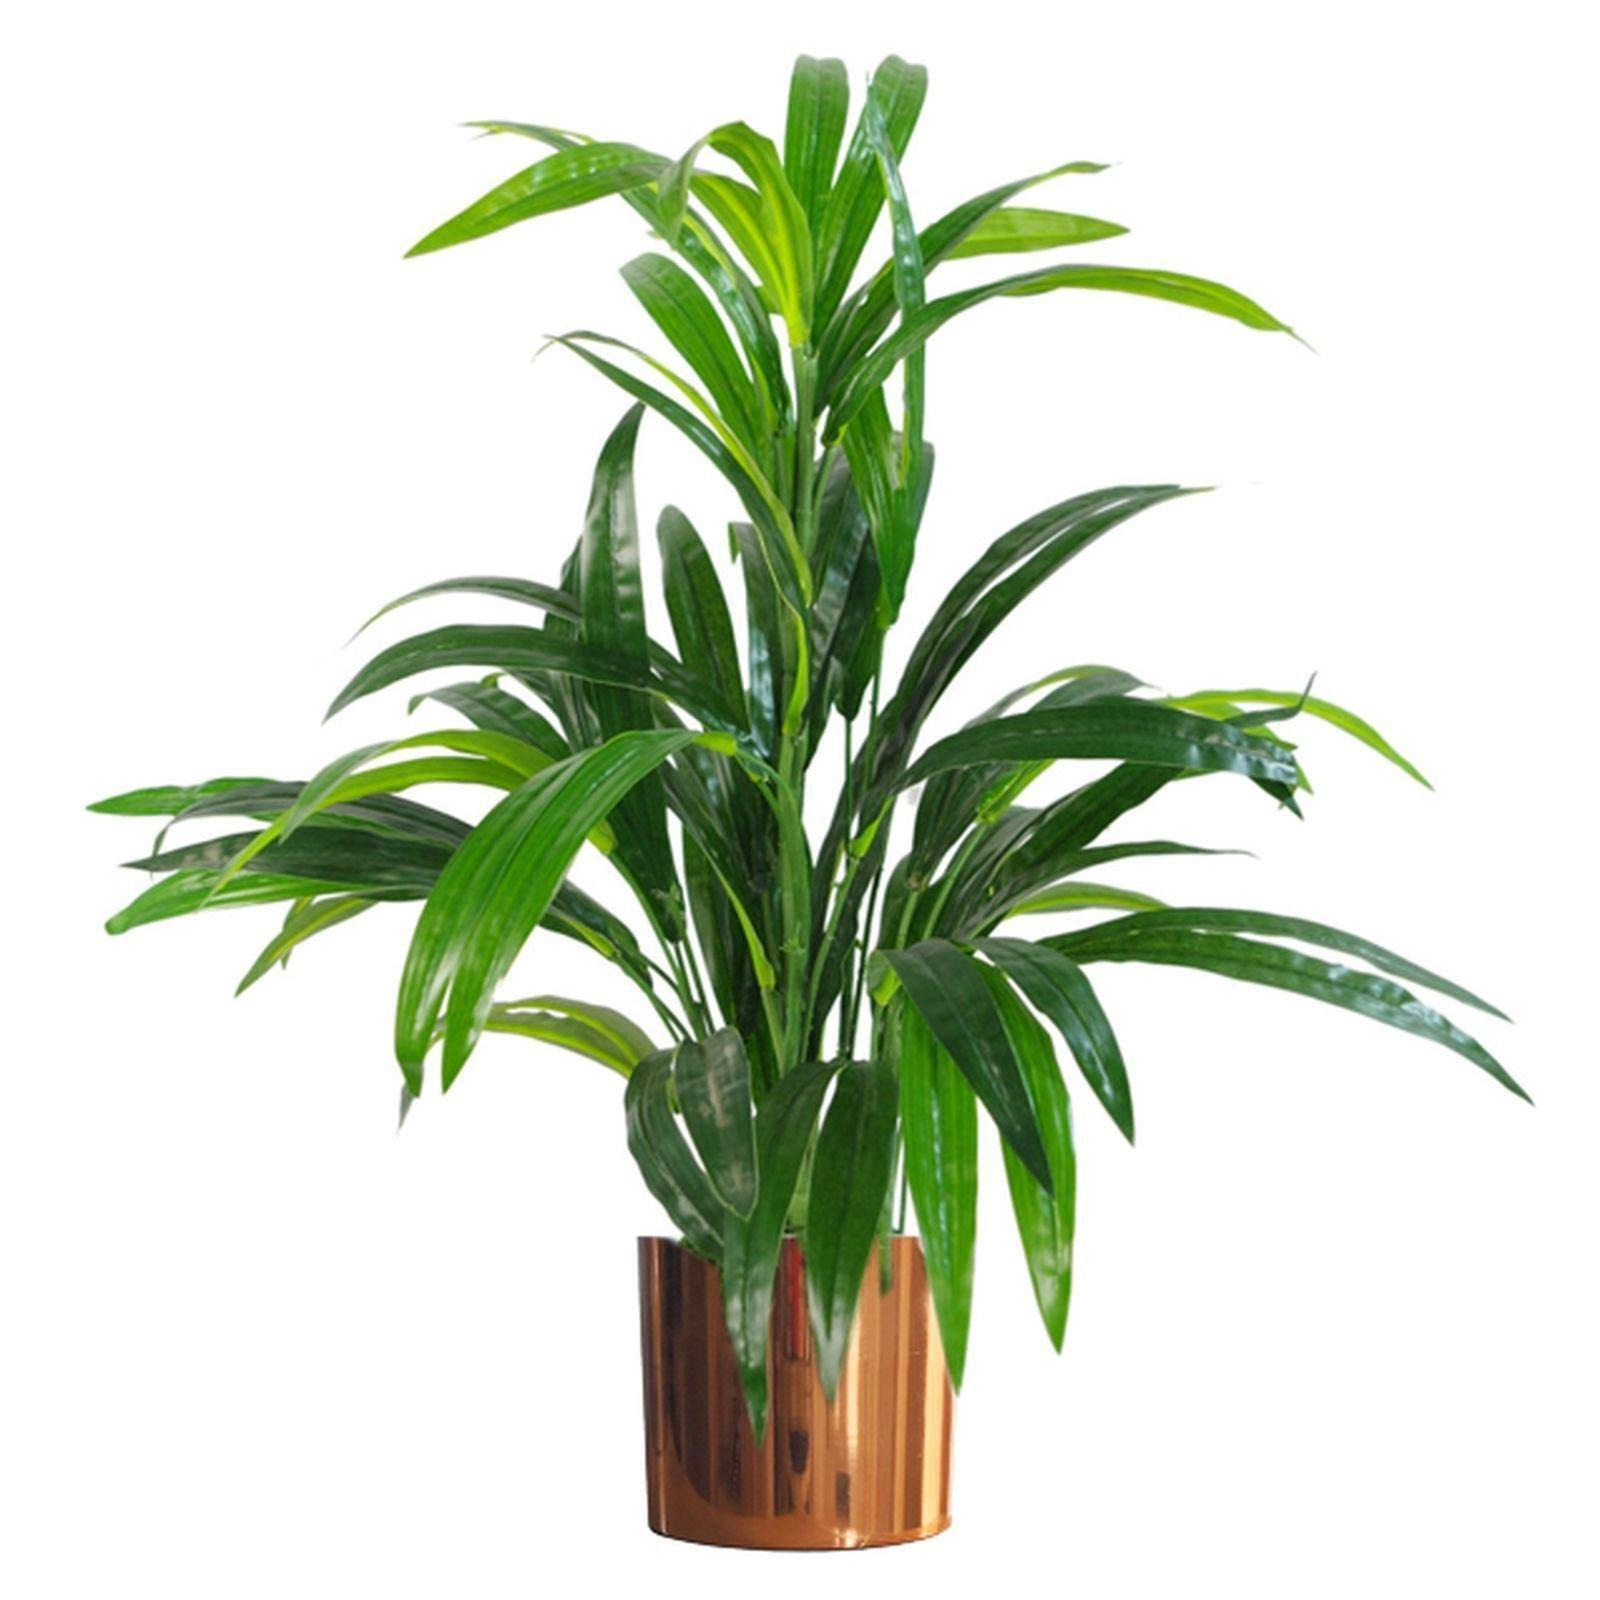 65cm Artificial Large Leaf Bamboo Shrub Plant with Copper Metal Planter - image 1